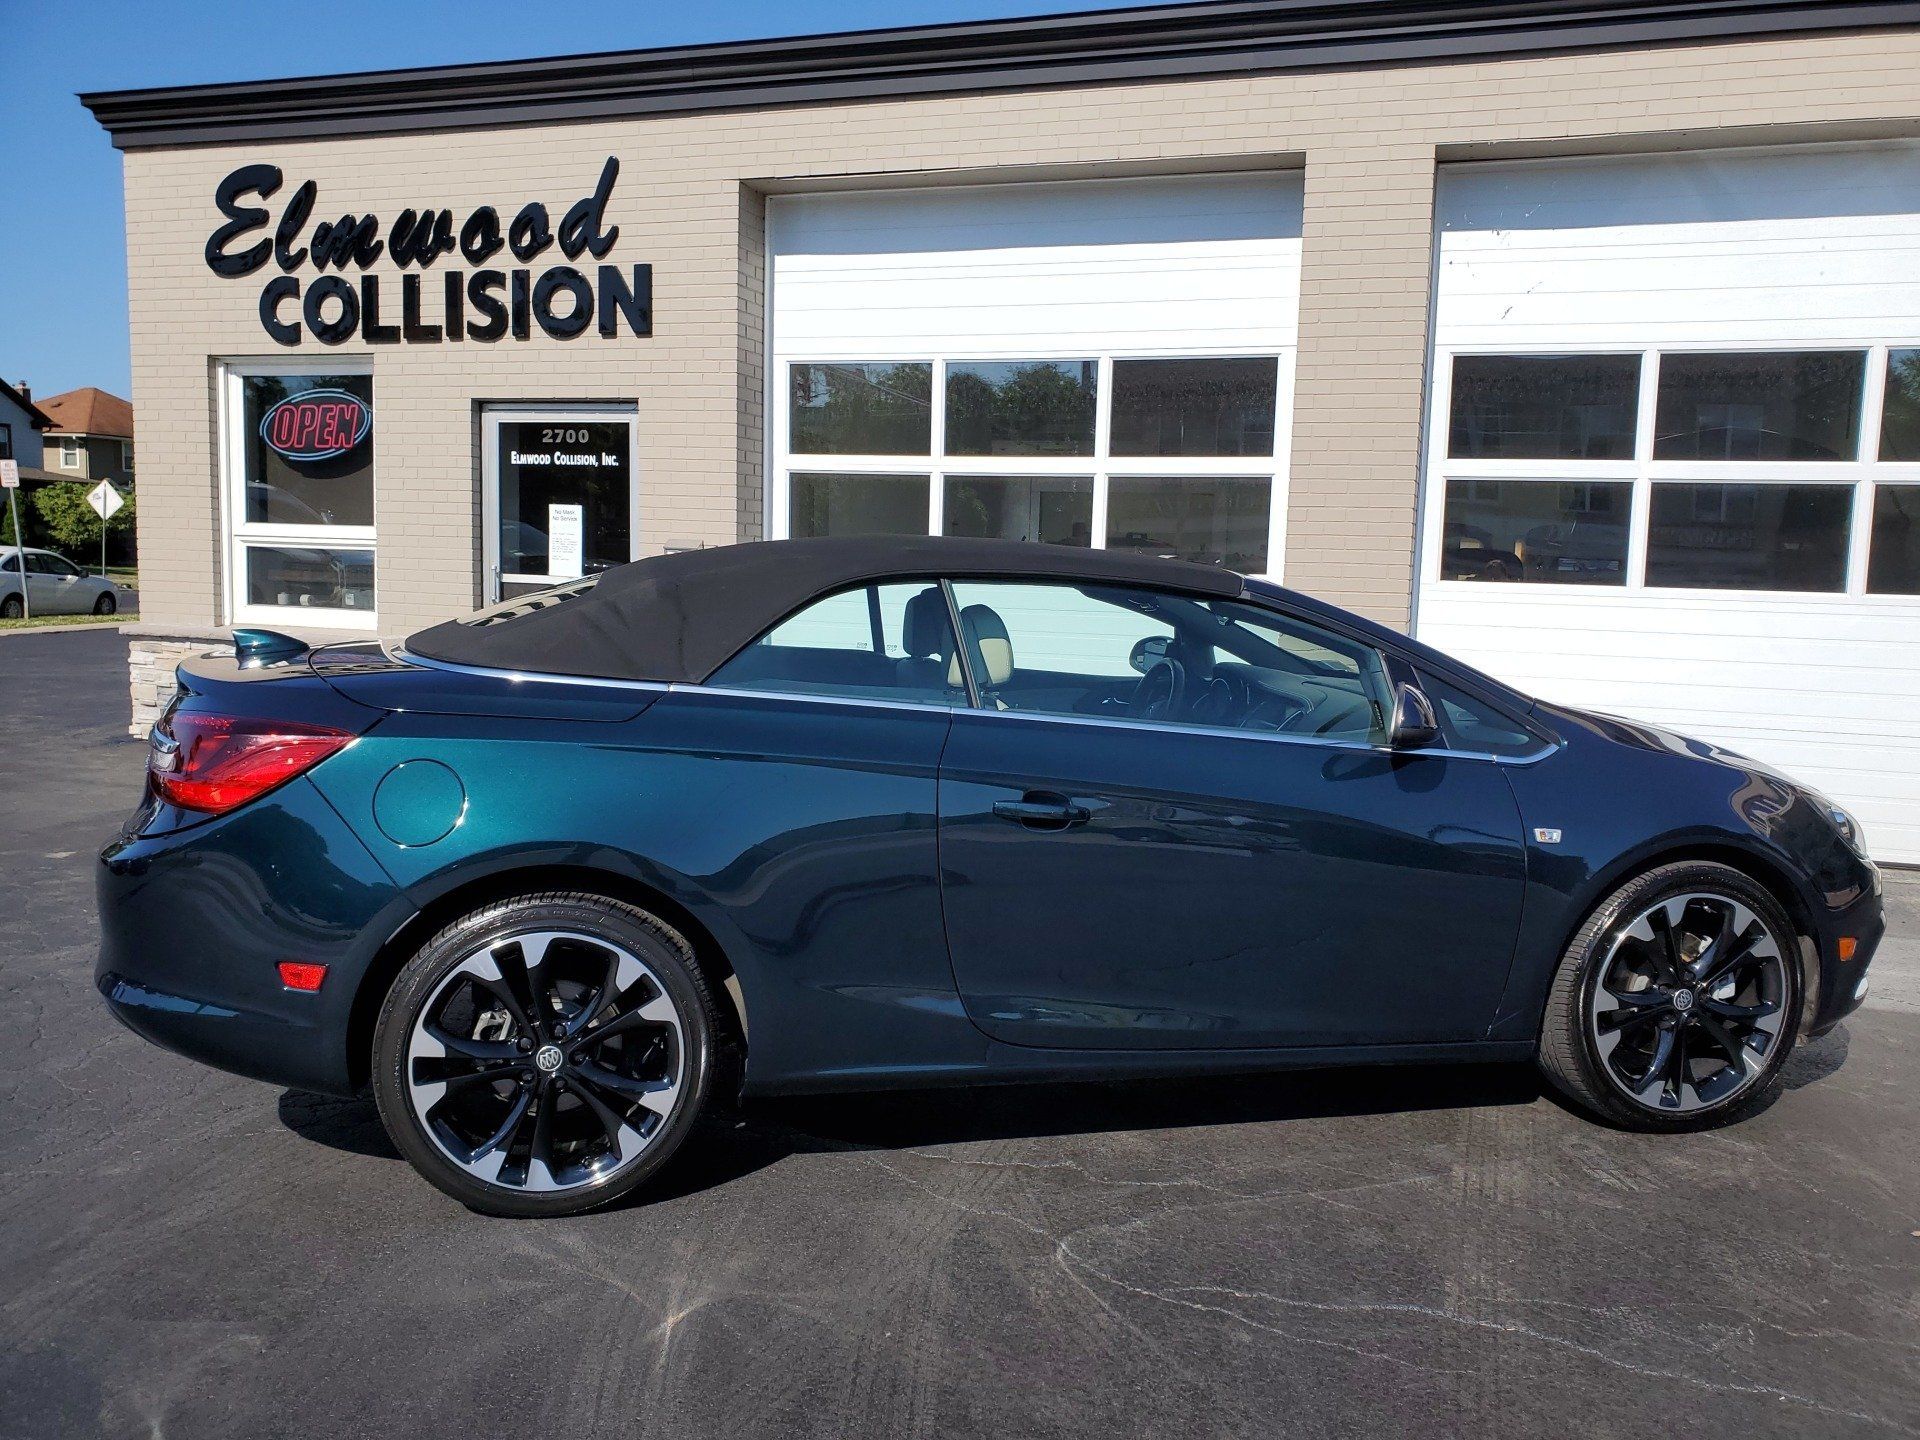 Elmwood Collision 2018 Buick Cascada job complete in parking lot outside Elmwood Collision in Kenmore, NY